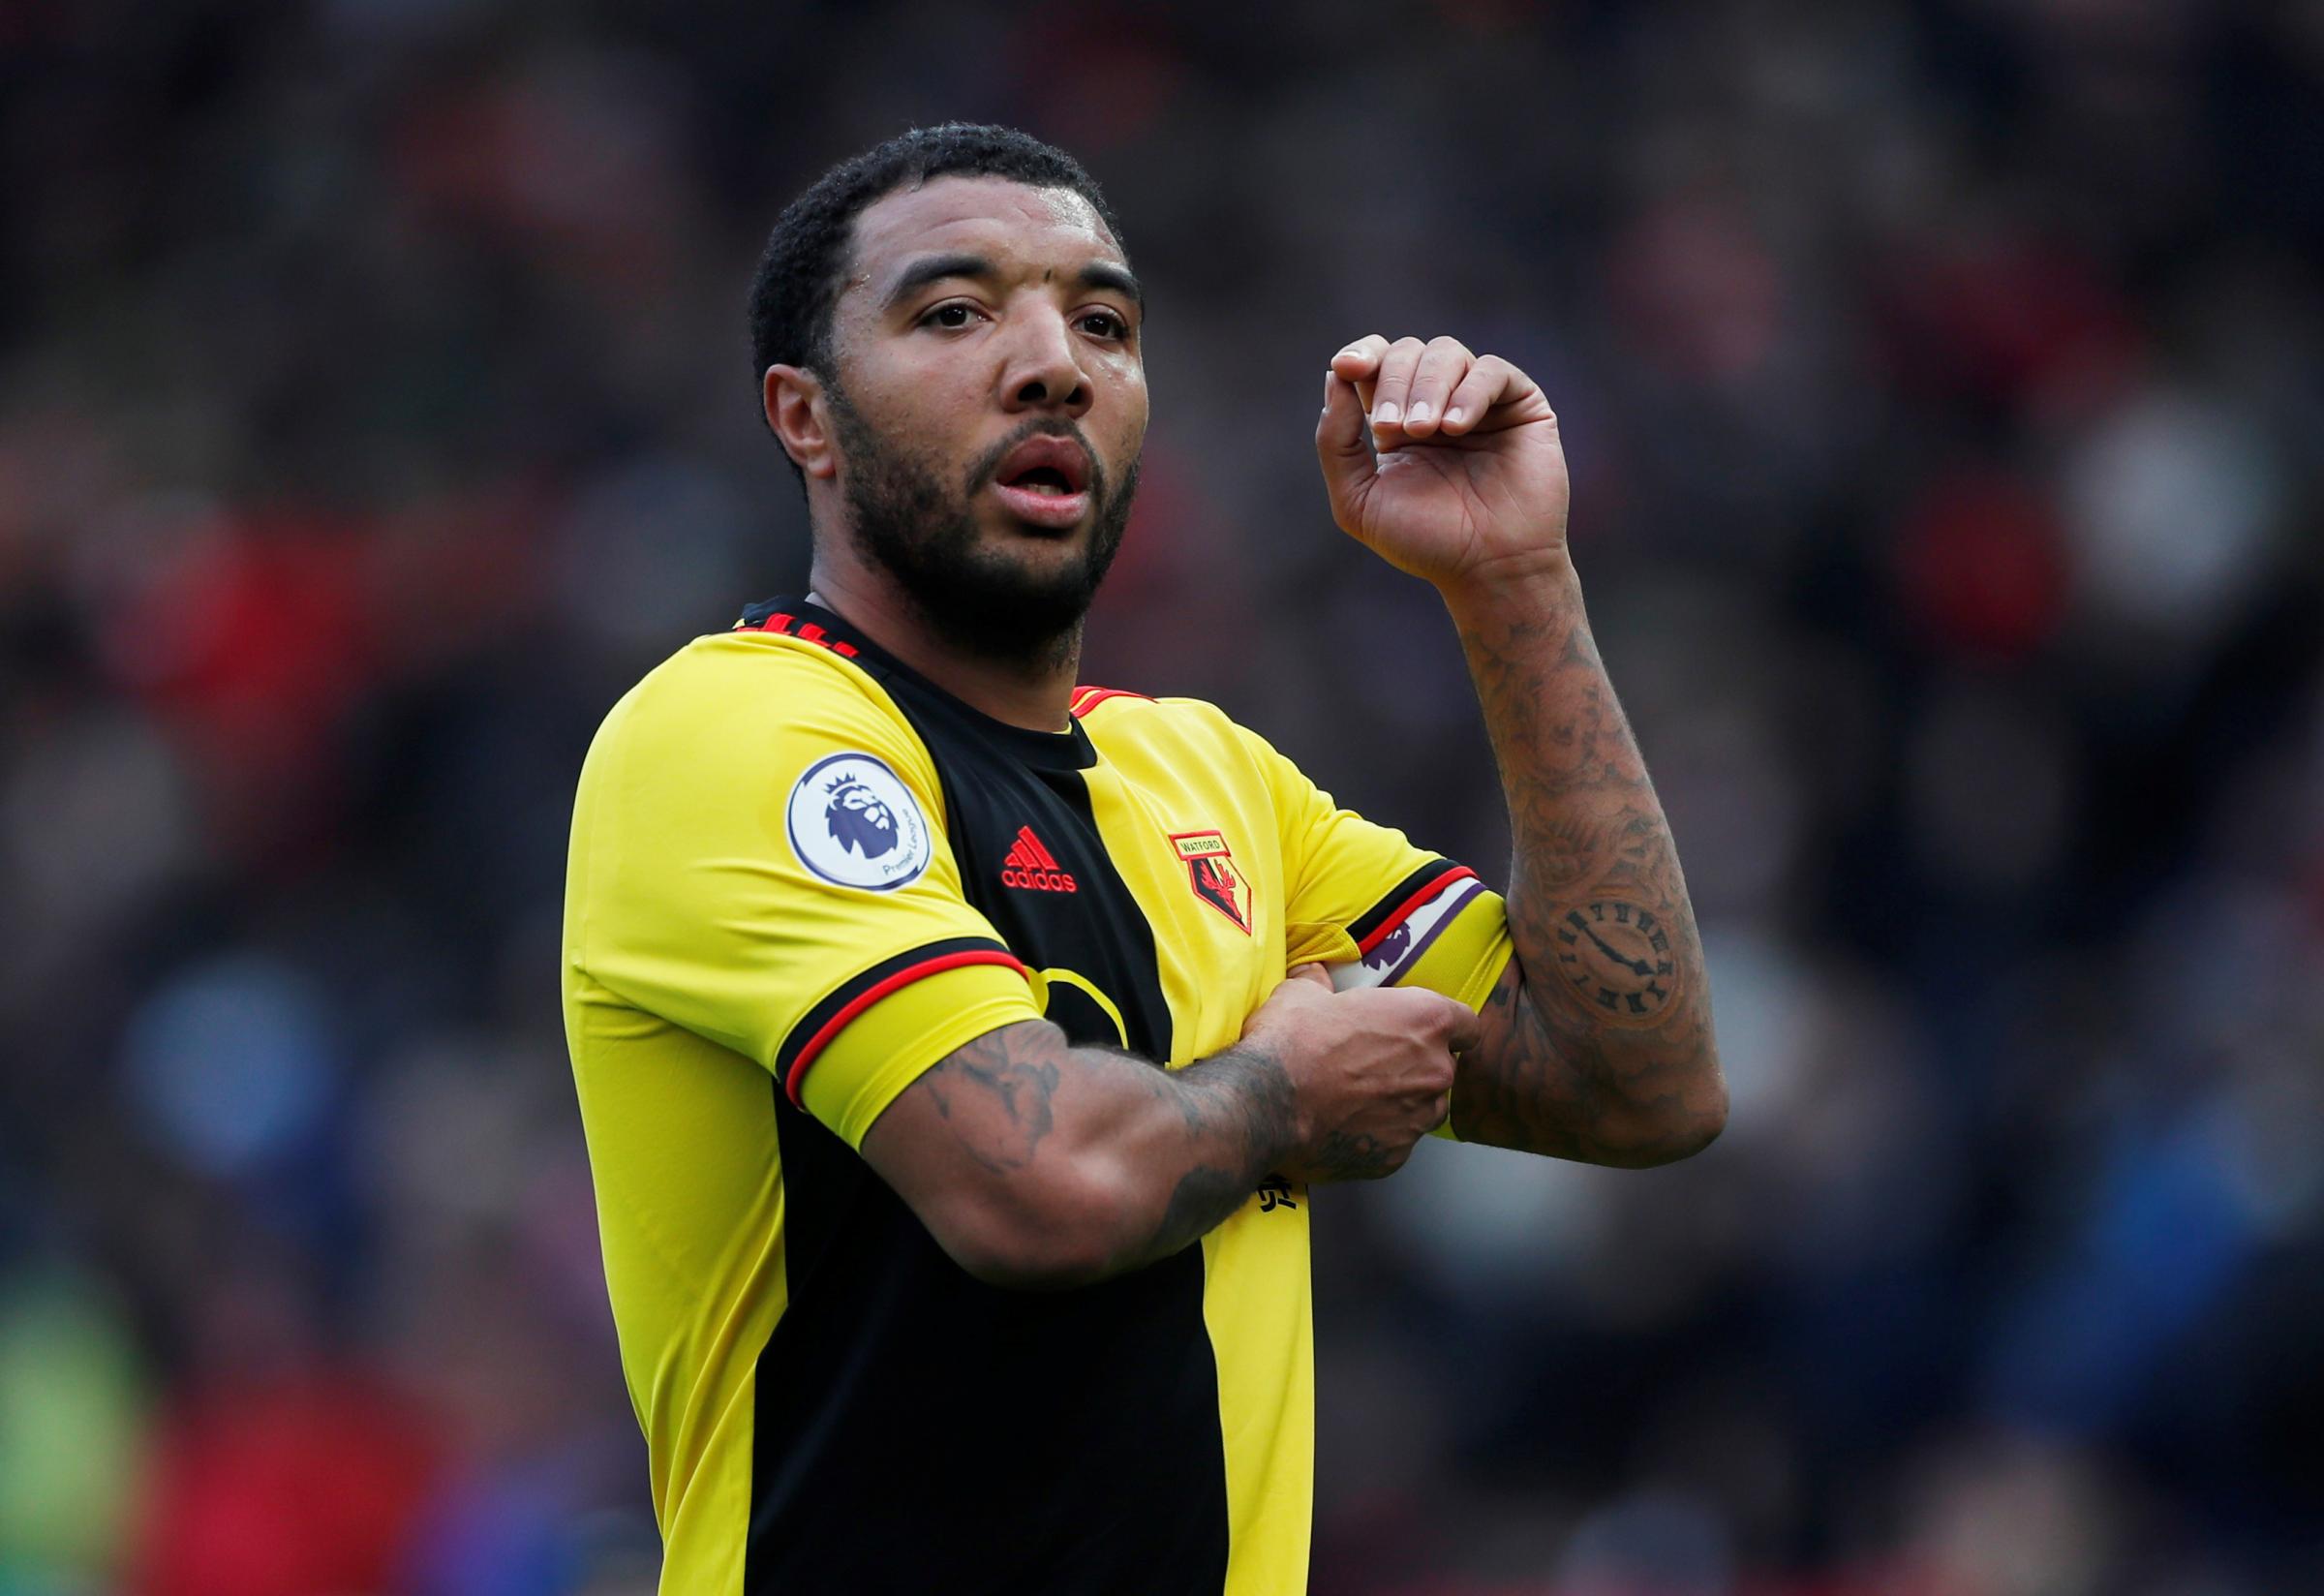 Watford expect Troy Deeney back at training on Tuesday